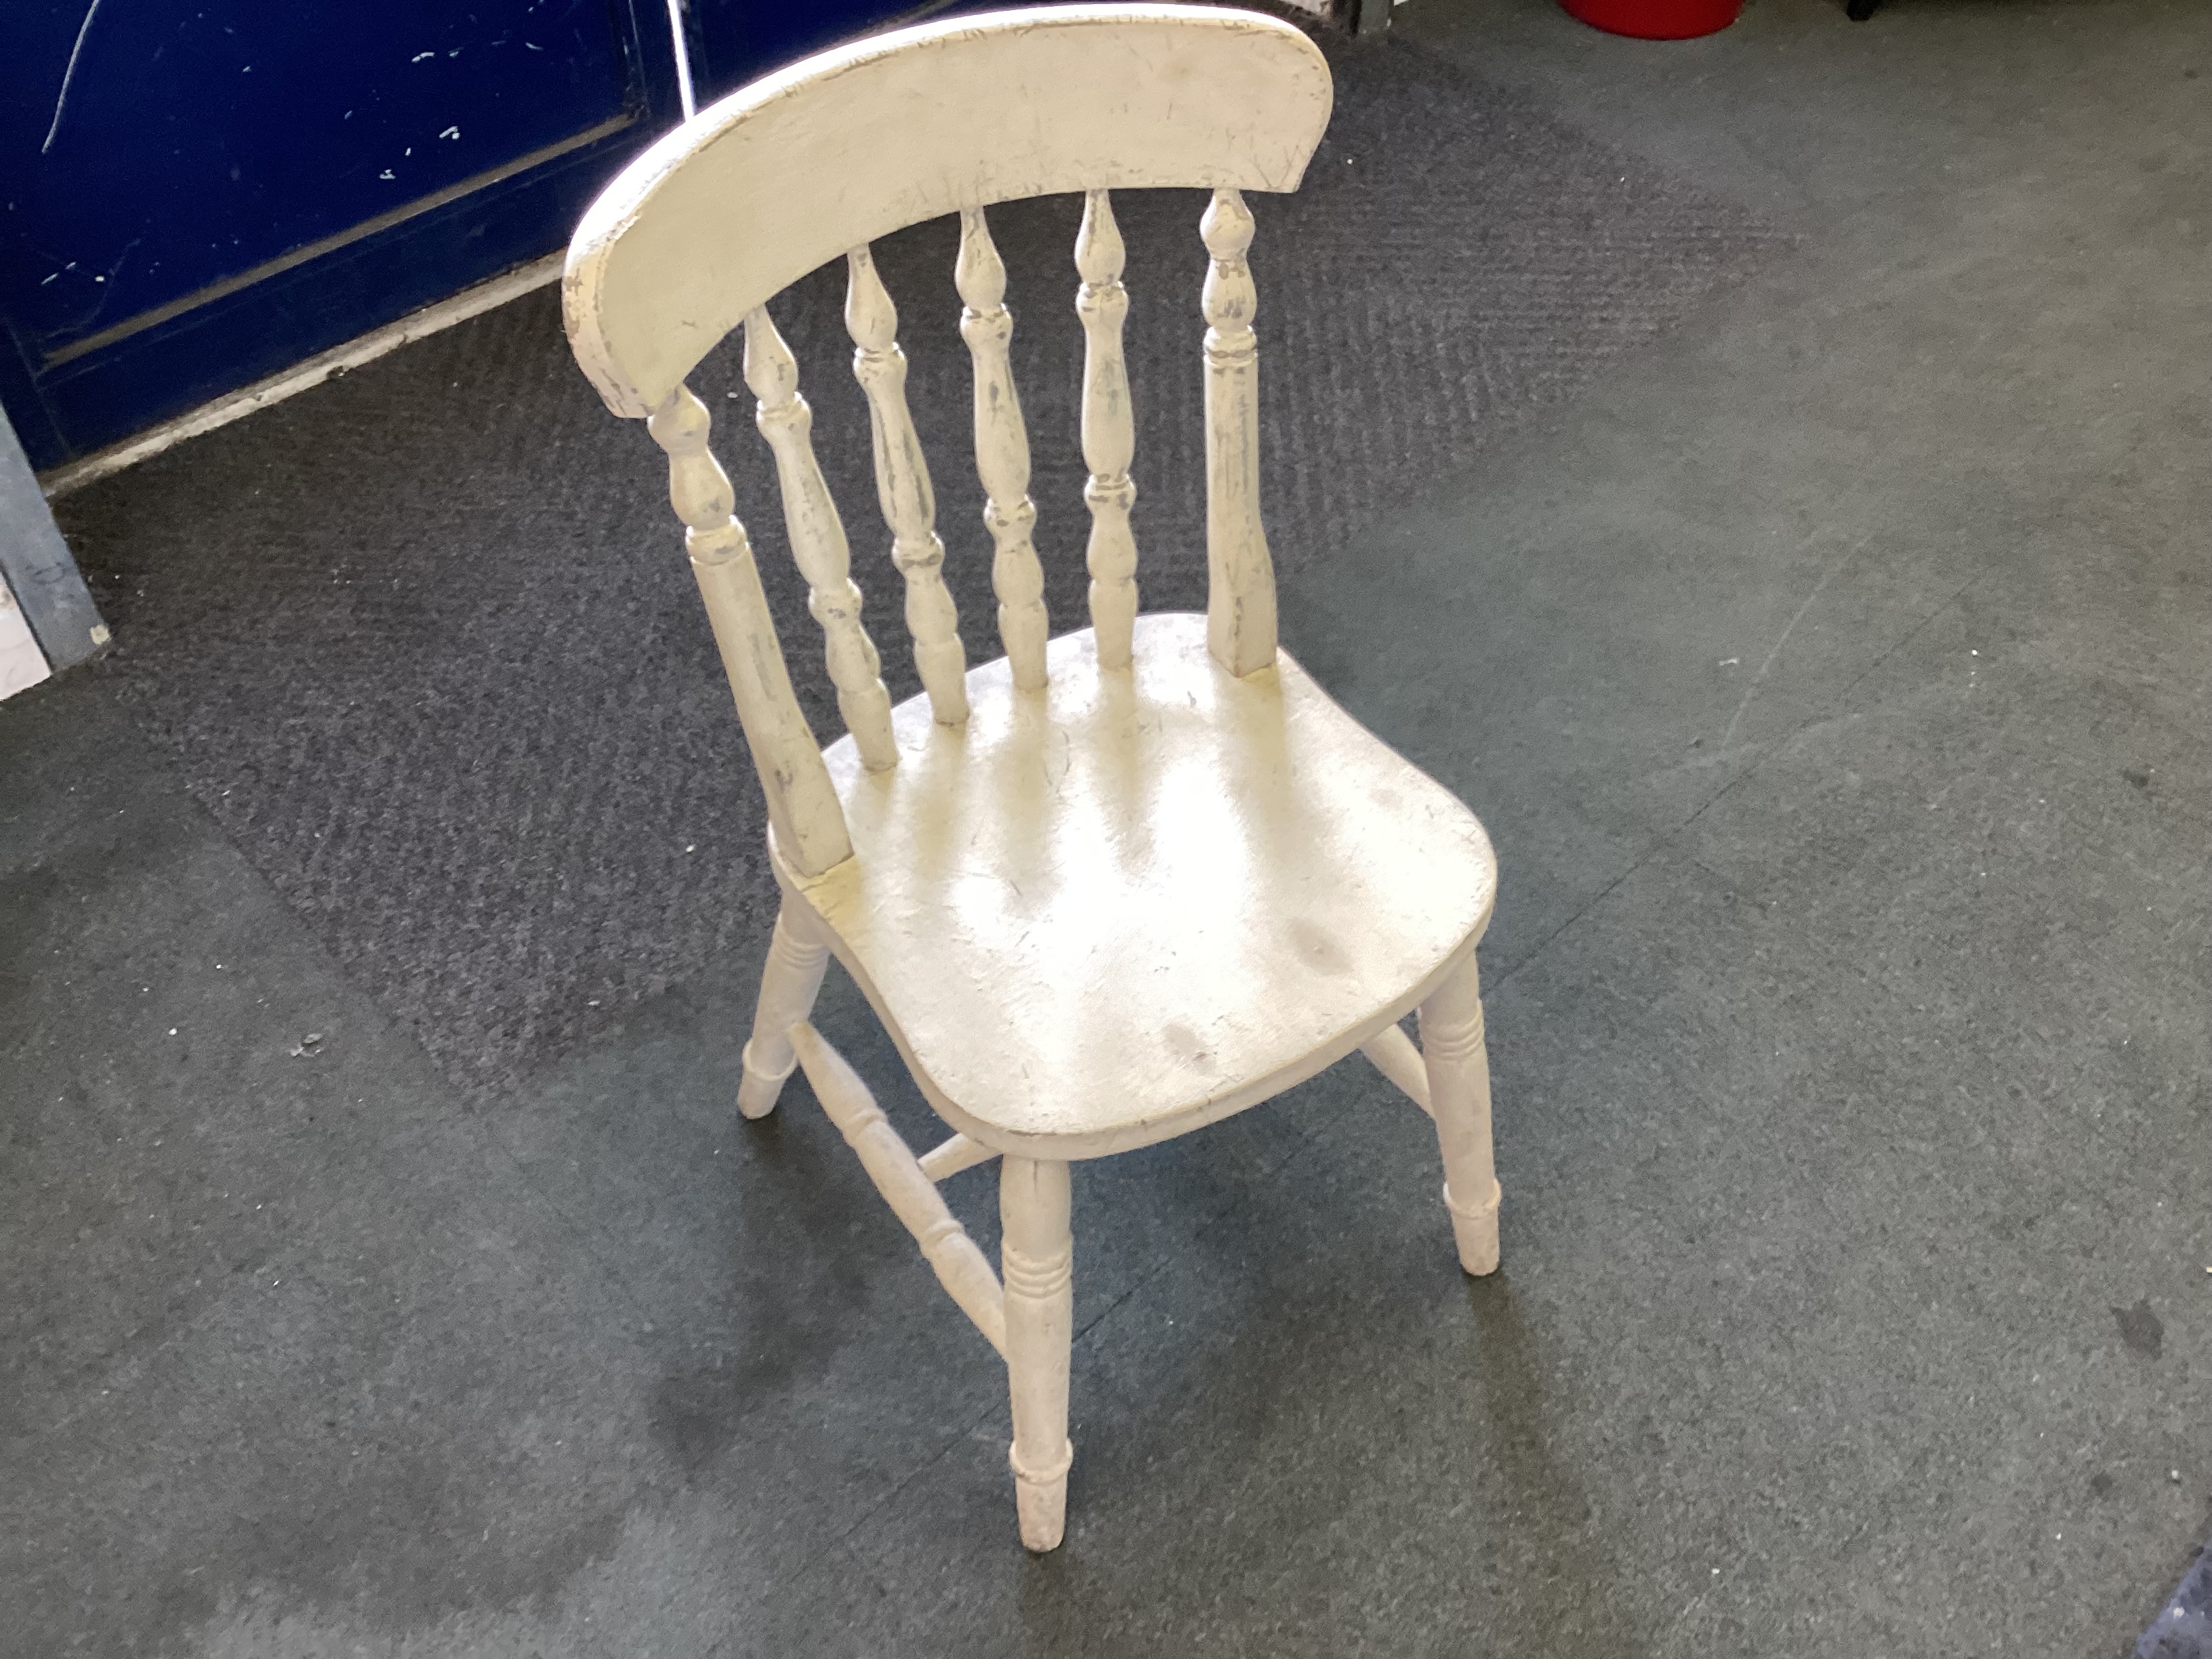 White Painted Kitchen Chair